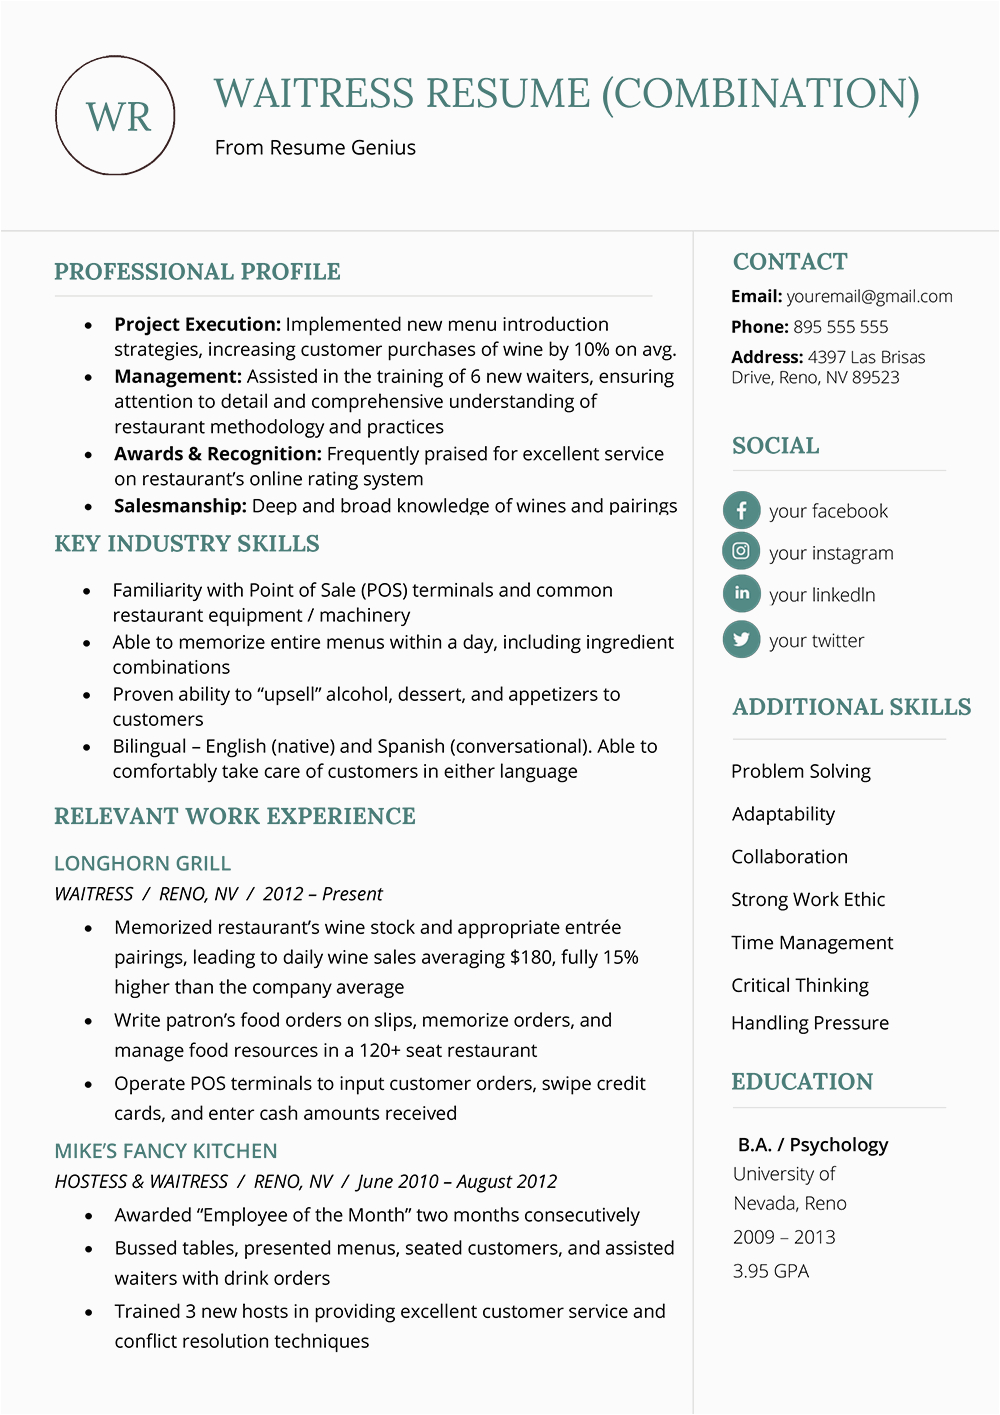 I Need to Look at Sample Resumes Resume format Best Resume formats for 2019